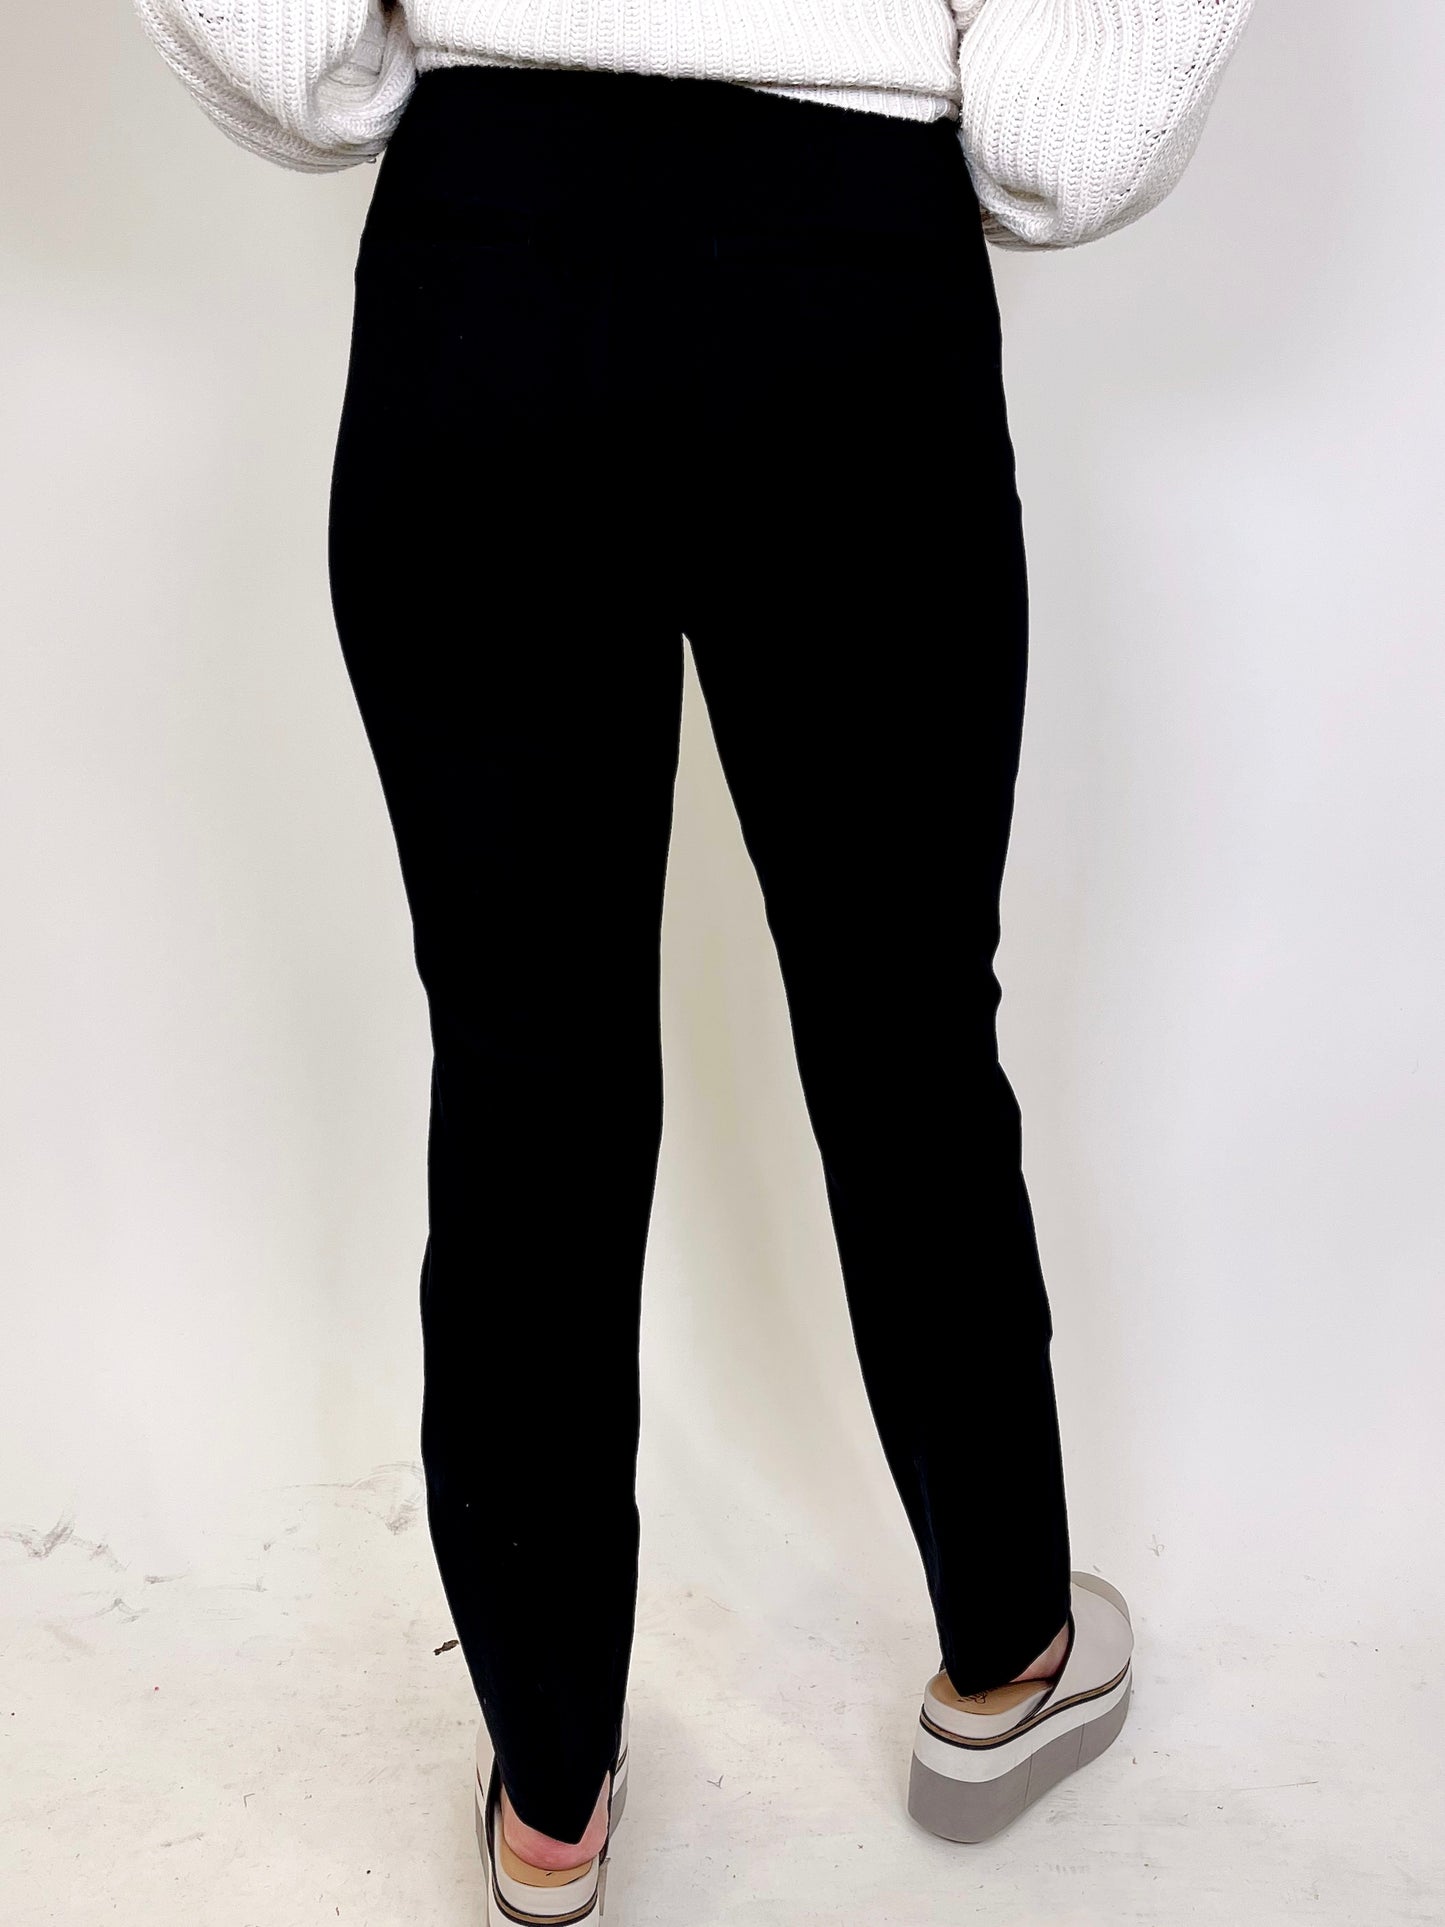 Spanx | Perfect Pant - Slim Straight-Perfect Pant-Spanx-The Village Shoppe, Women’s Fashion Boutique, Shop Online and In Store - Located in Muscle Shoals, AL.